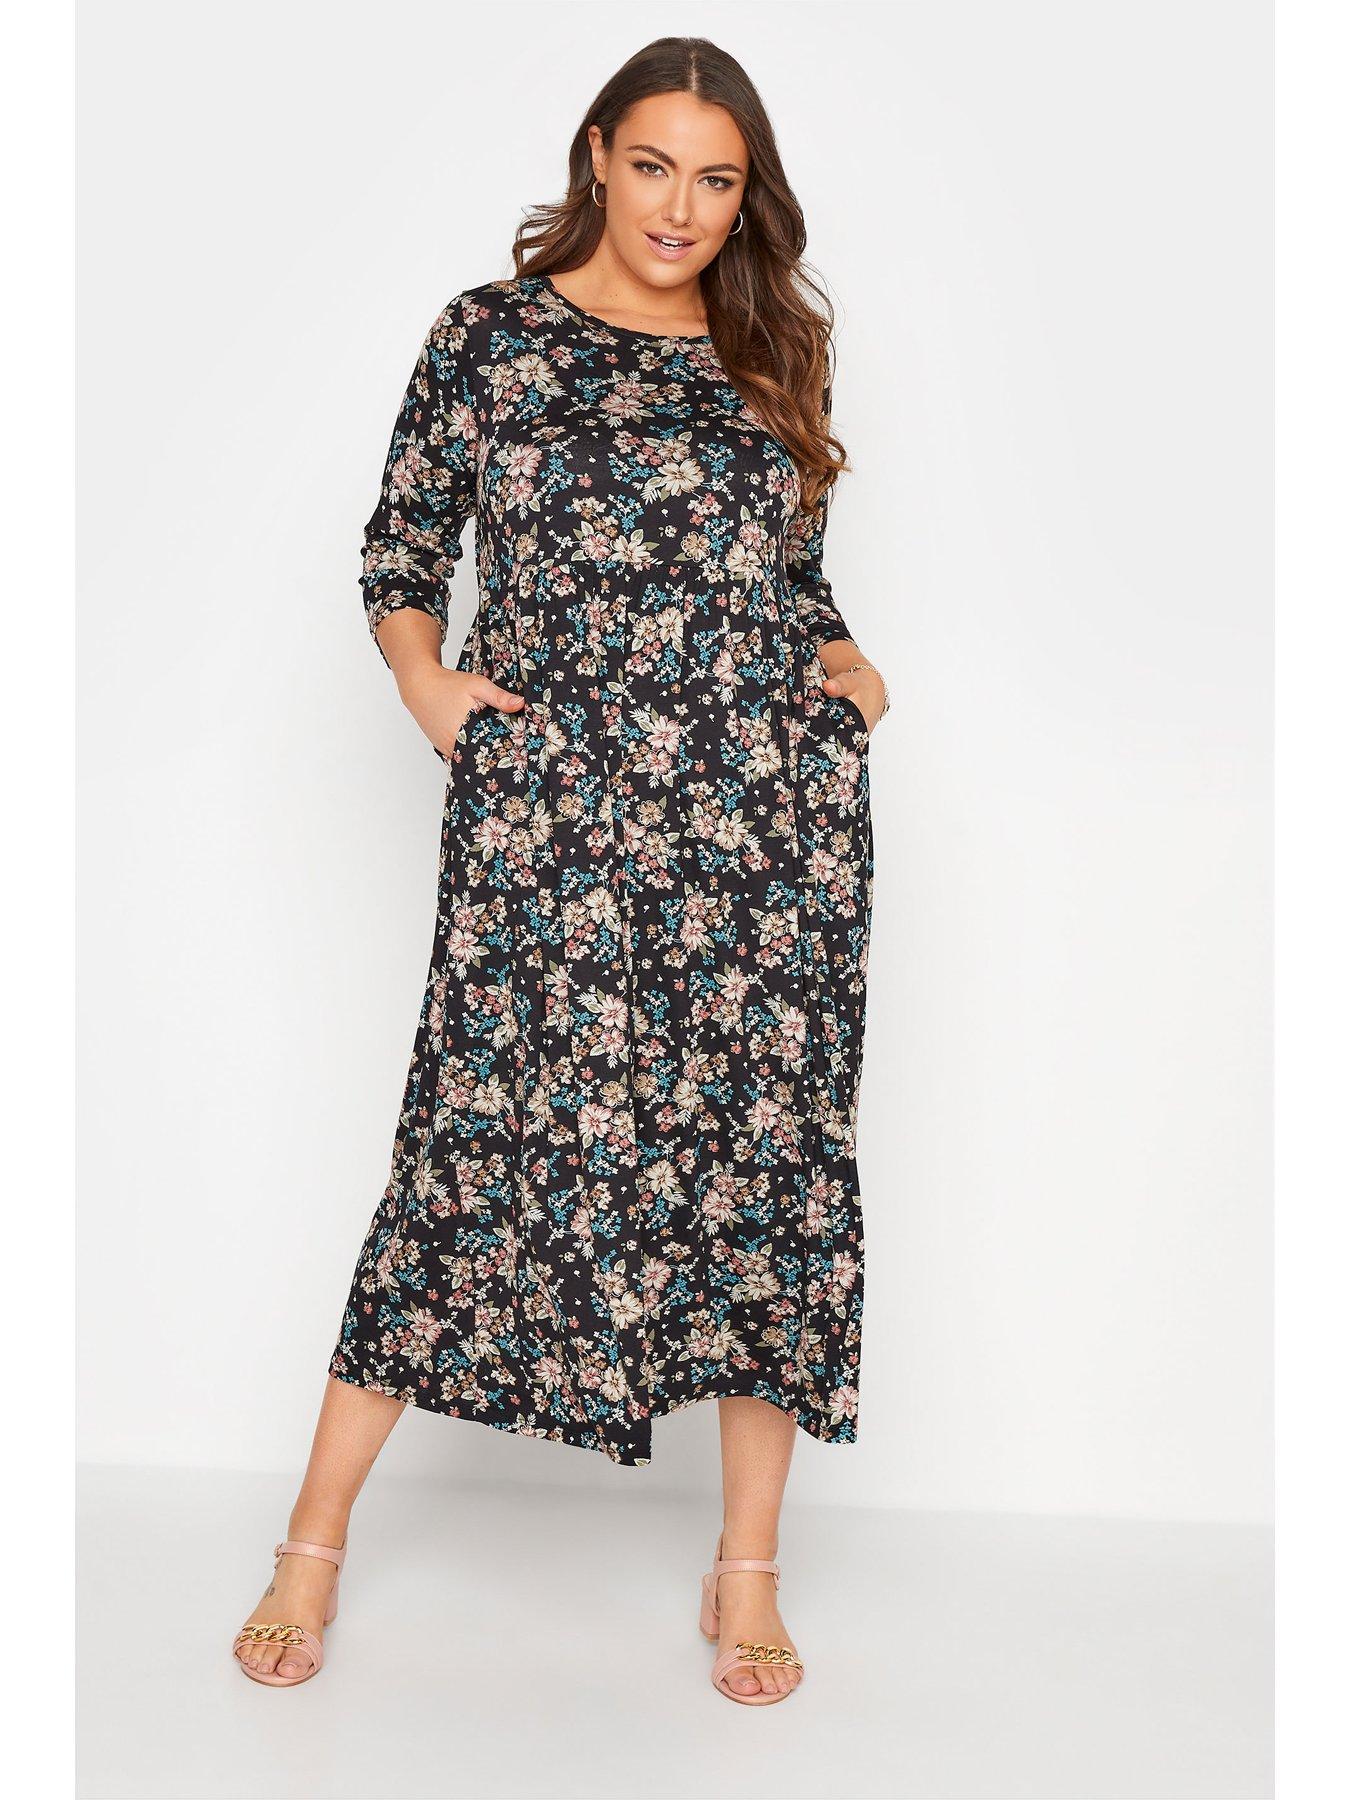  Yours Clothing Floral Dress - Black